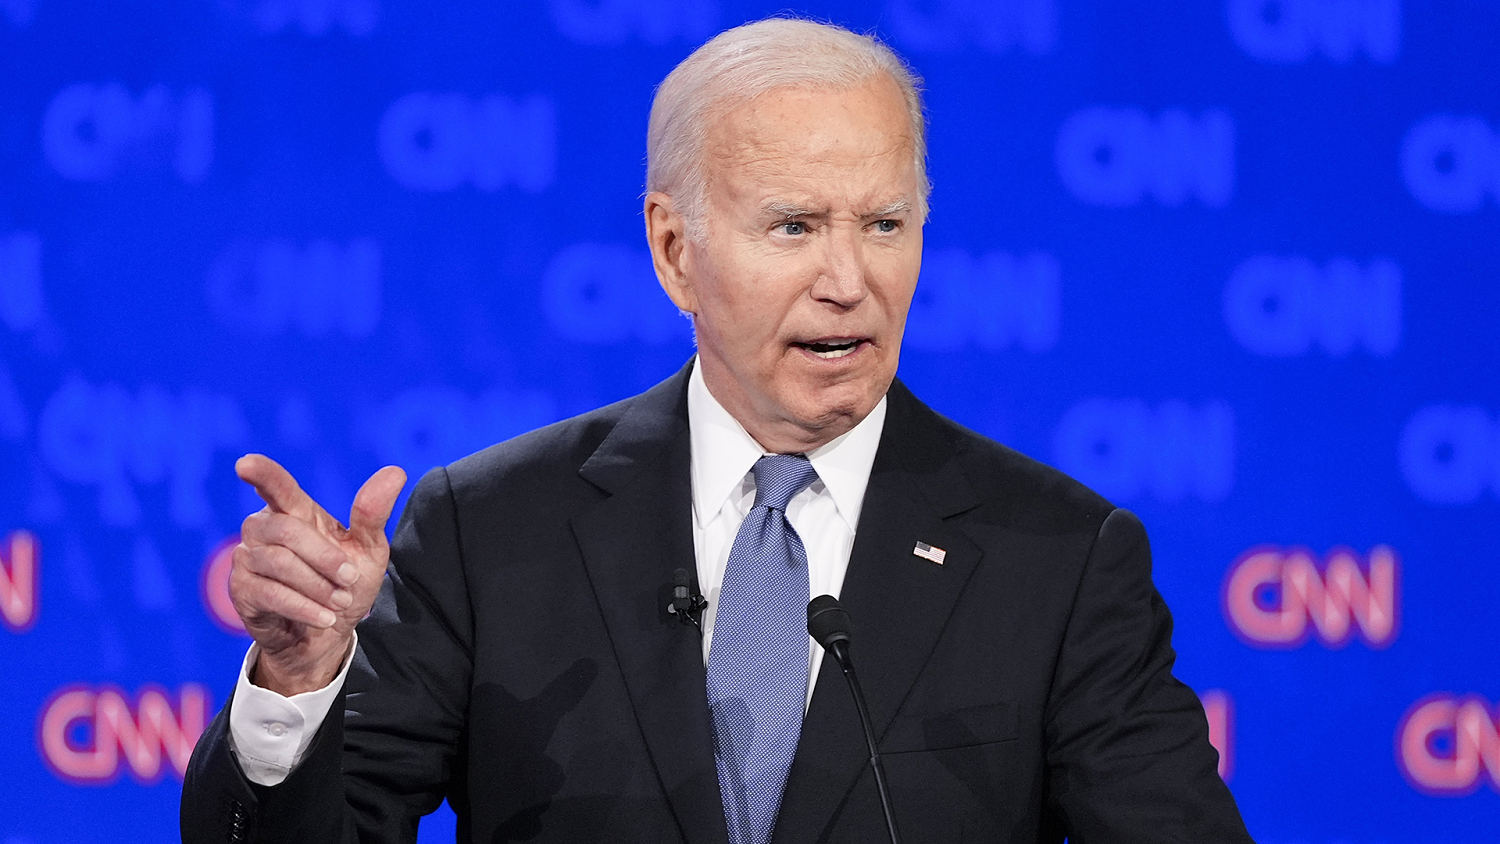 Biden calls Trump a ‘whiner’ for not accepting the 2020 election